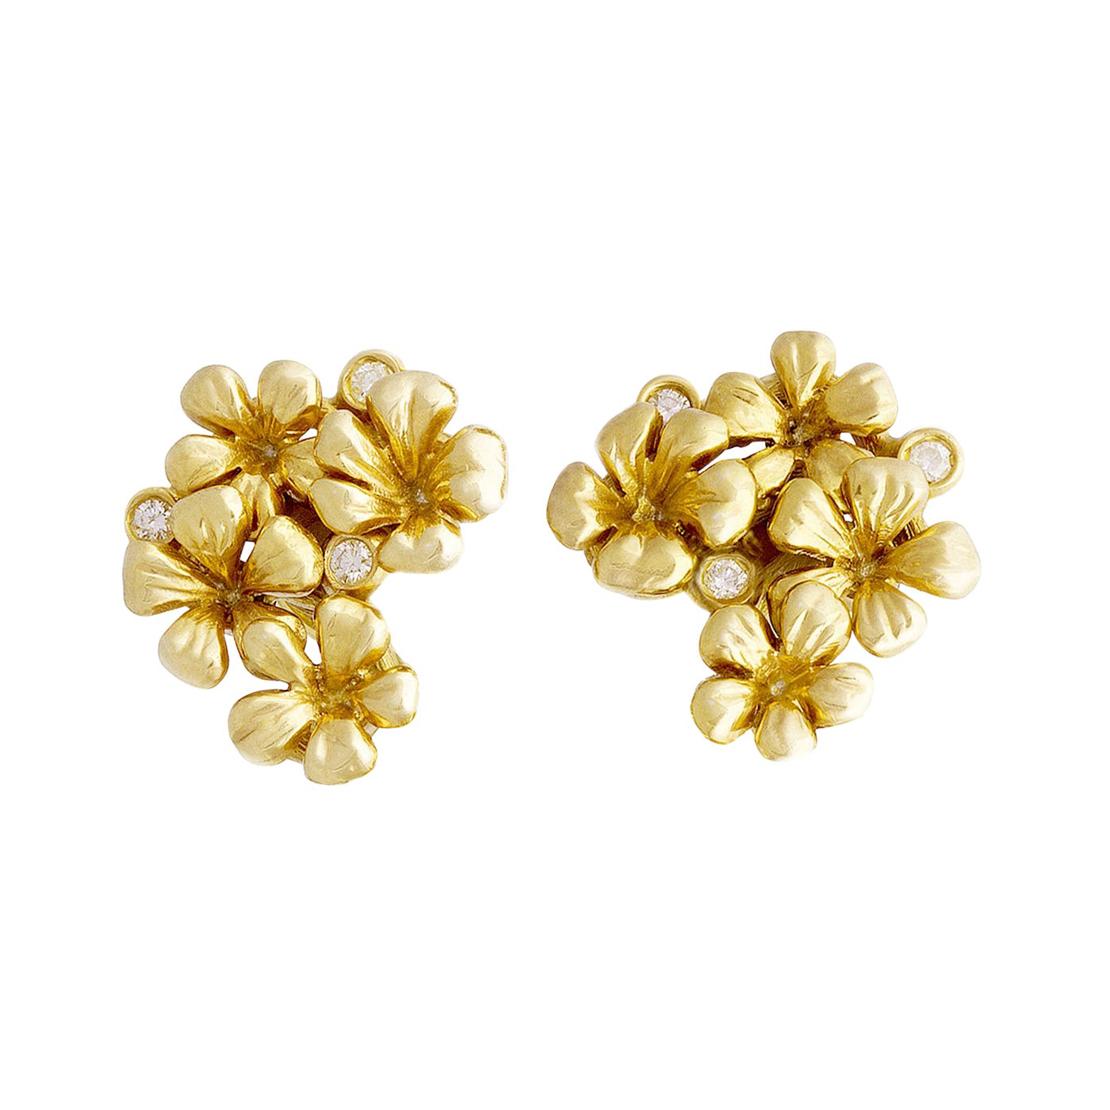 Yellow Gold Contemporary Clip-On Earrings by the Artist with Round Diamonds